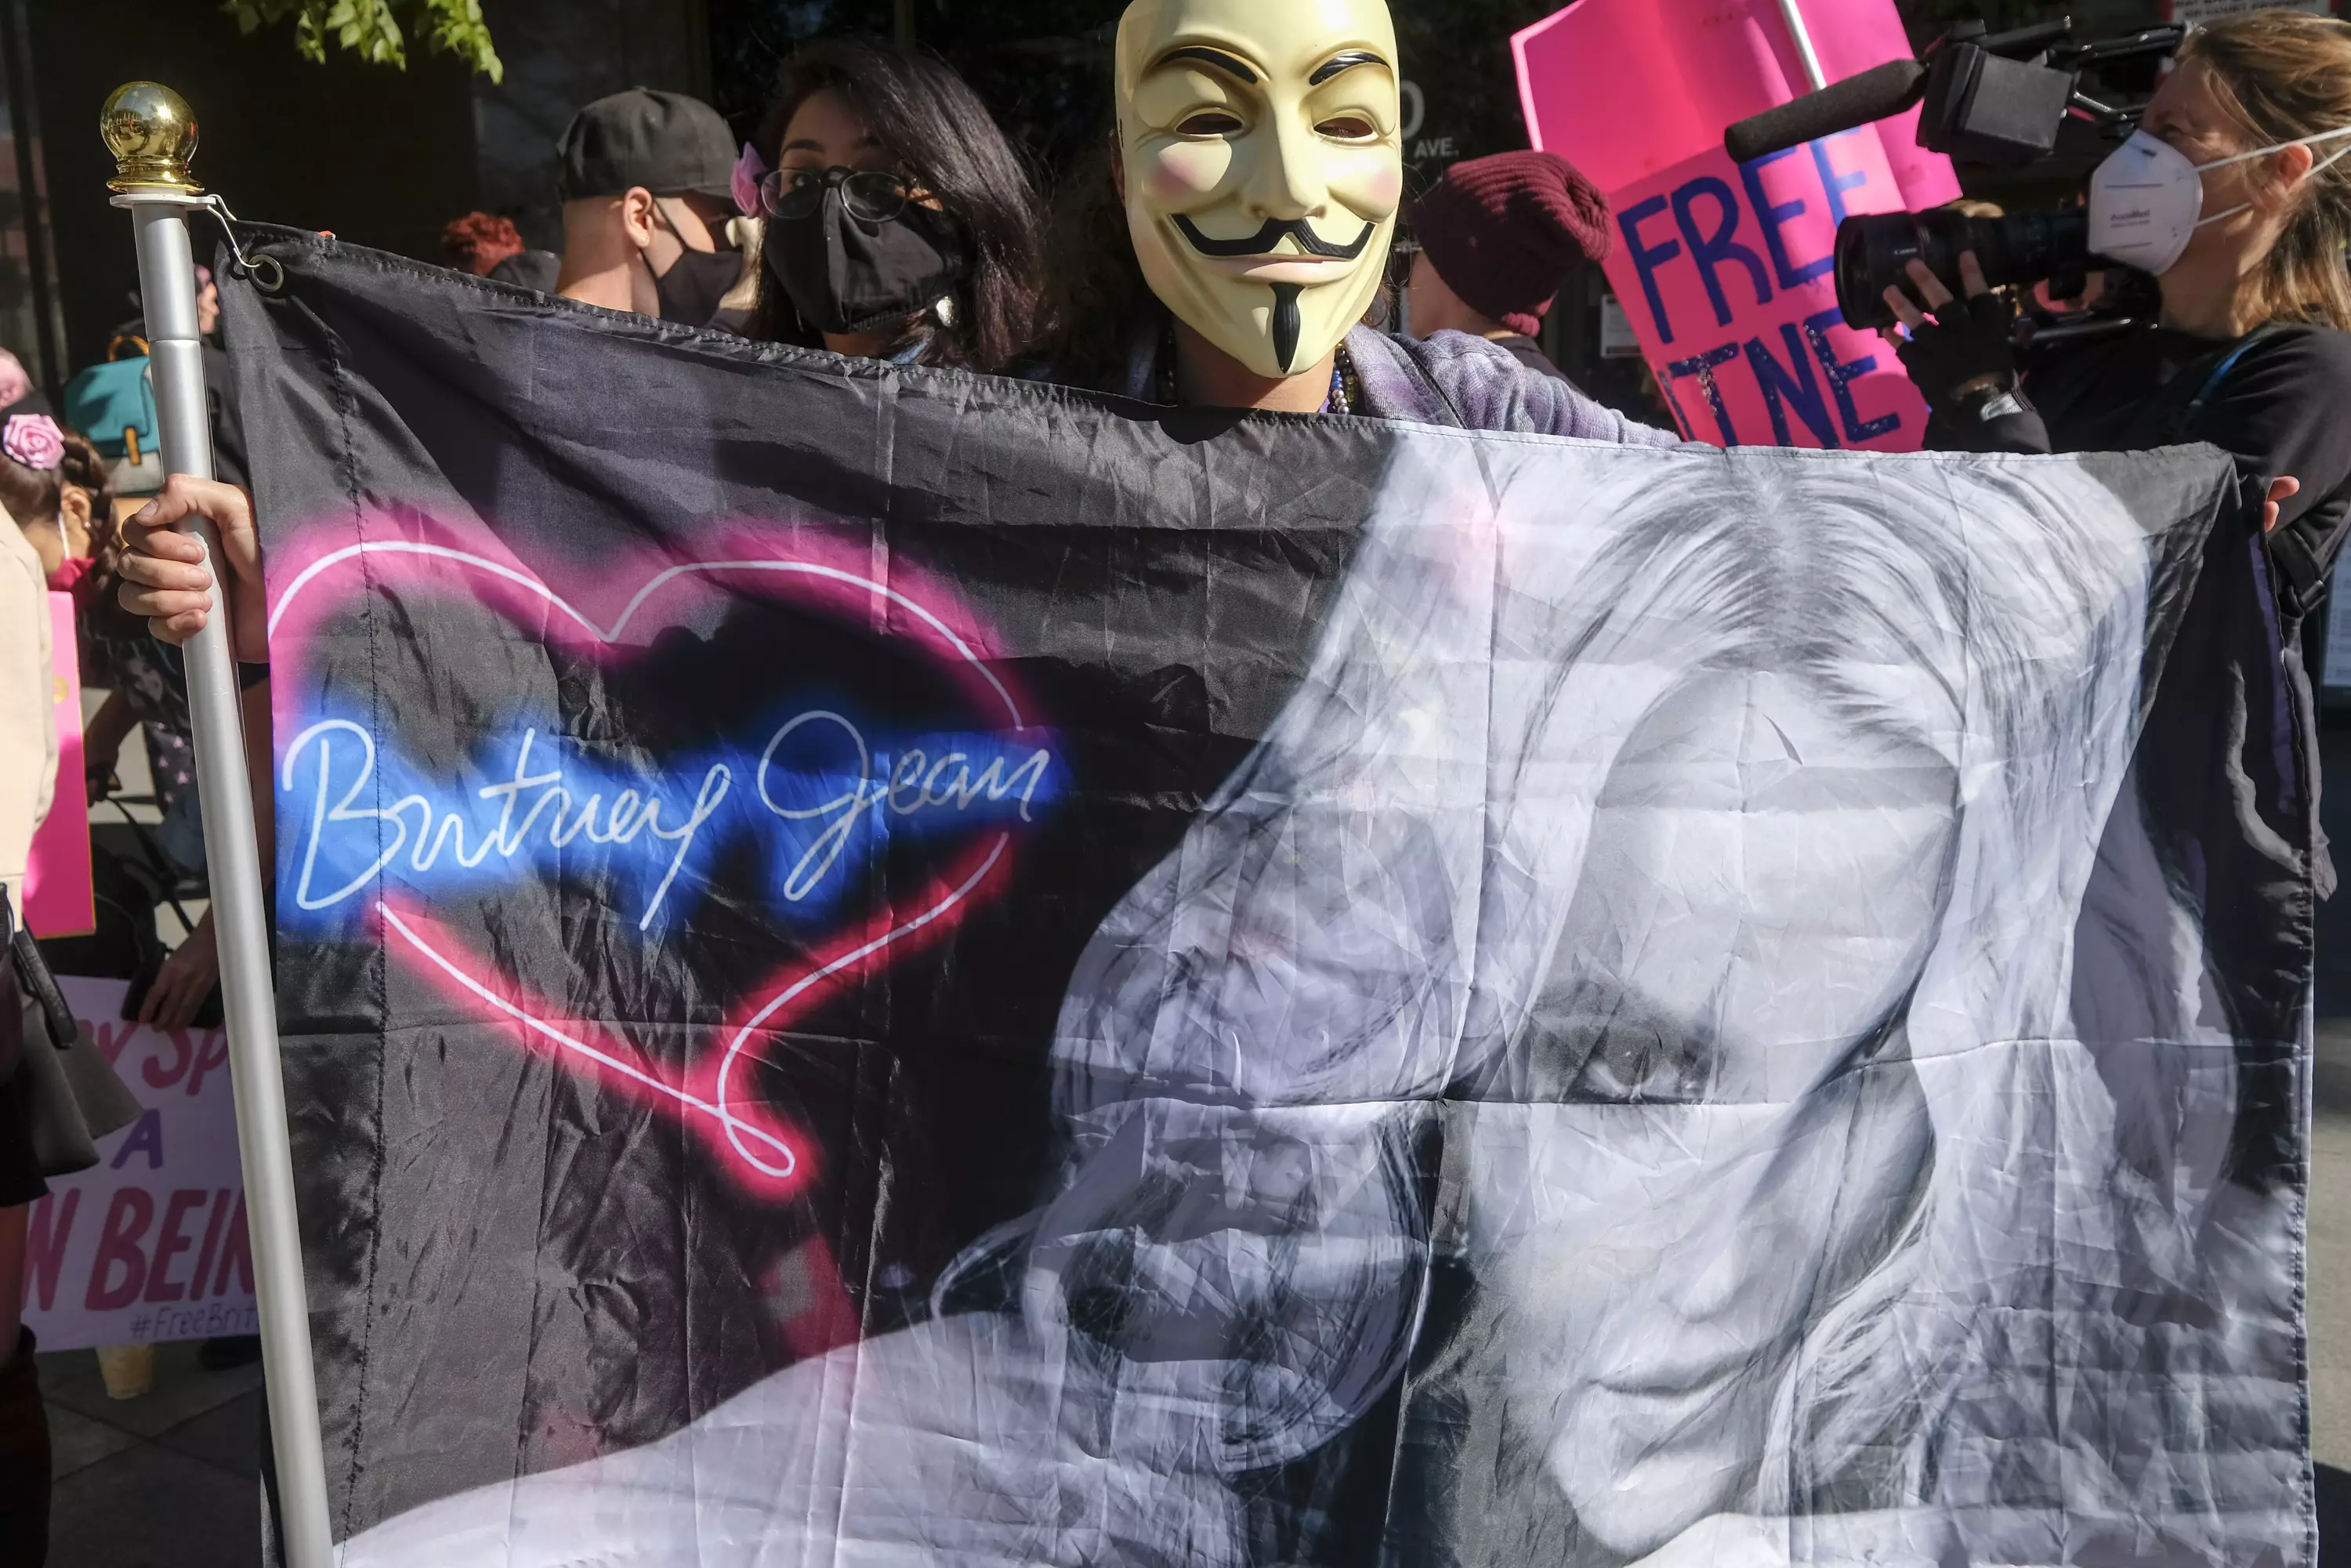 Britney's fans started the #FreeBritney movement due to the conservatorship (